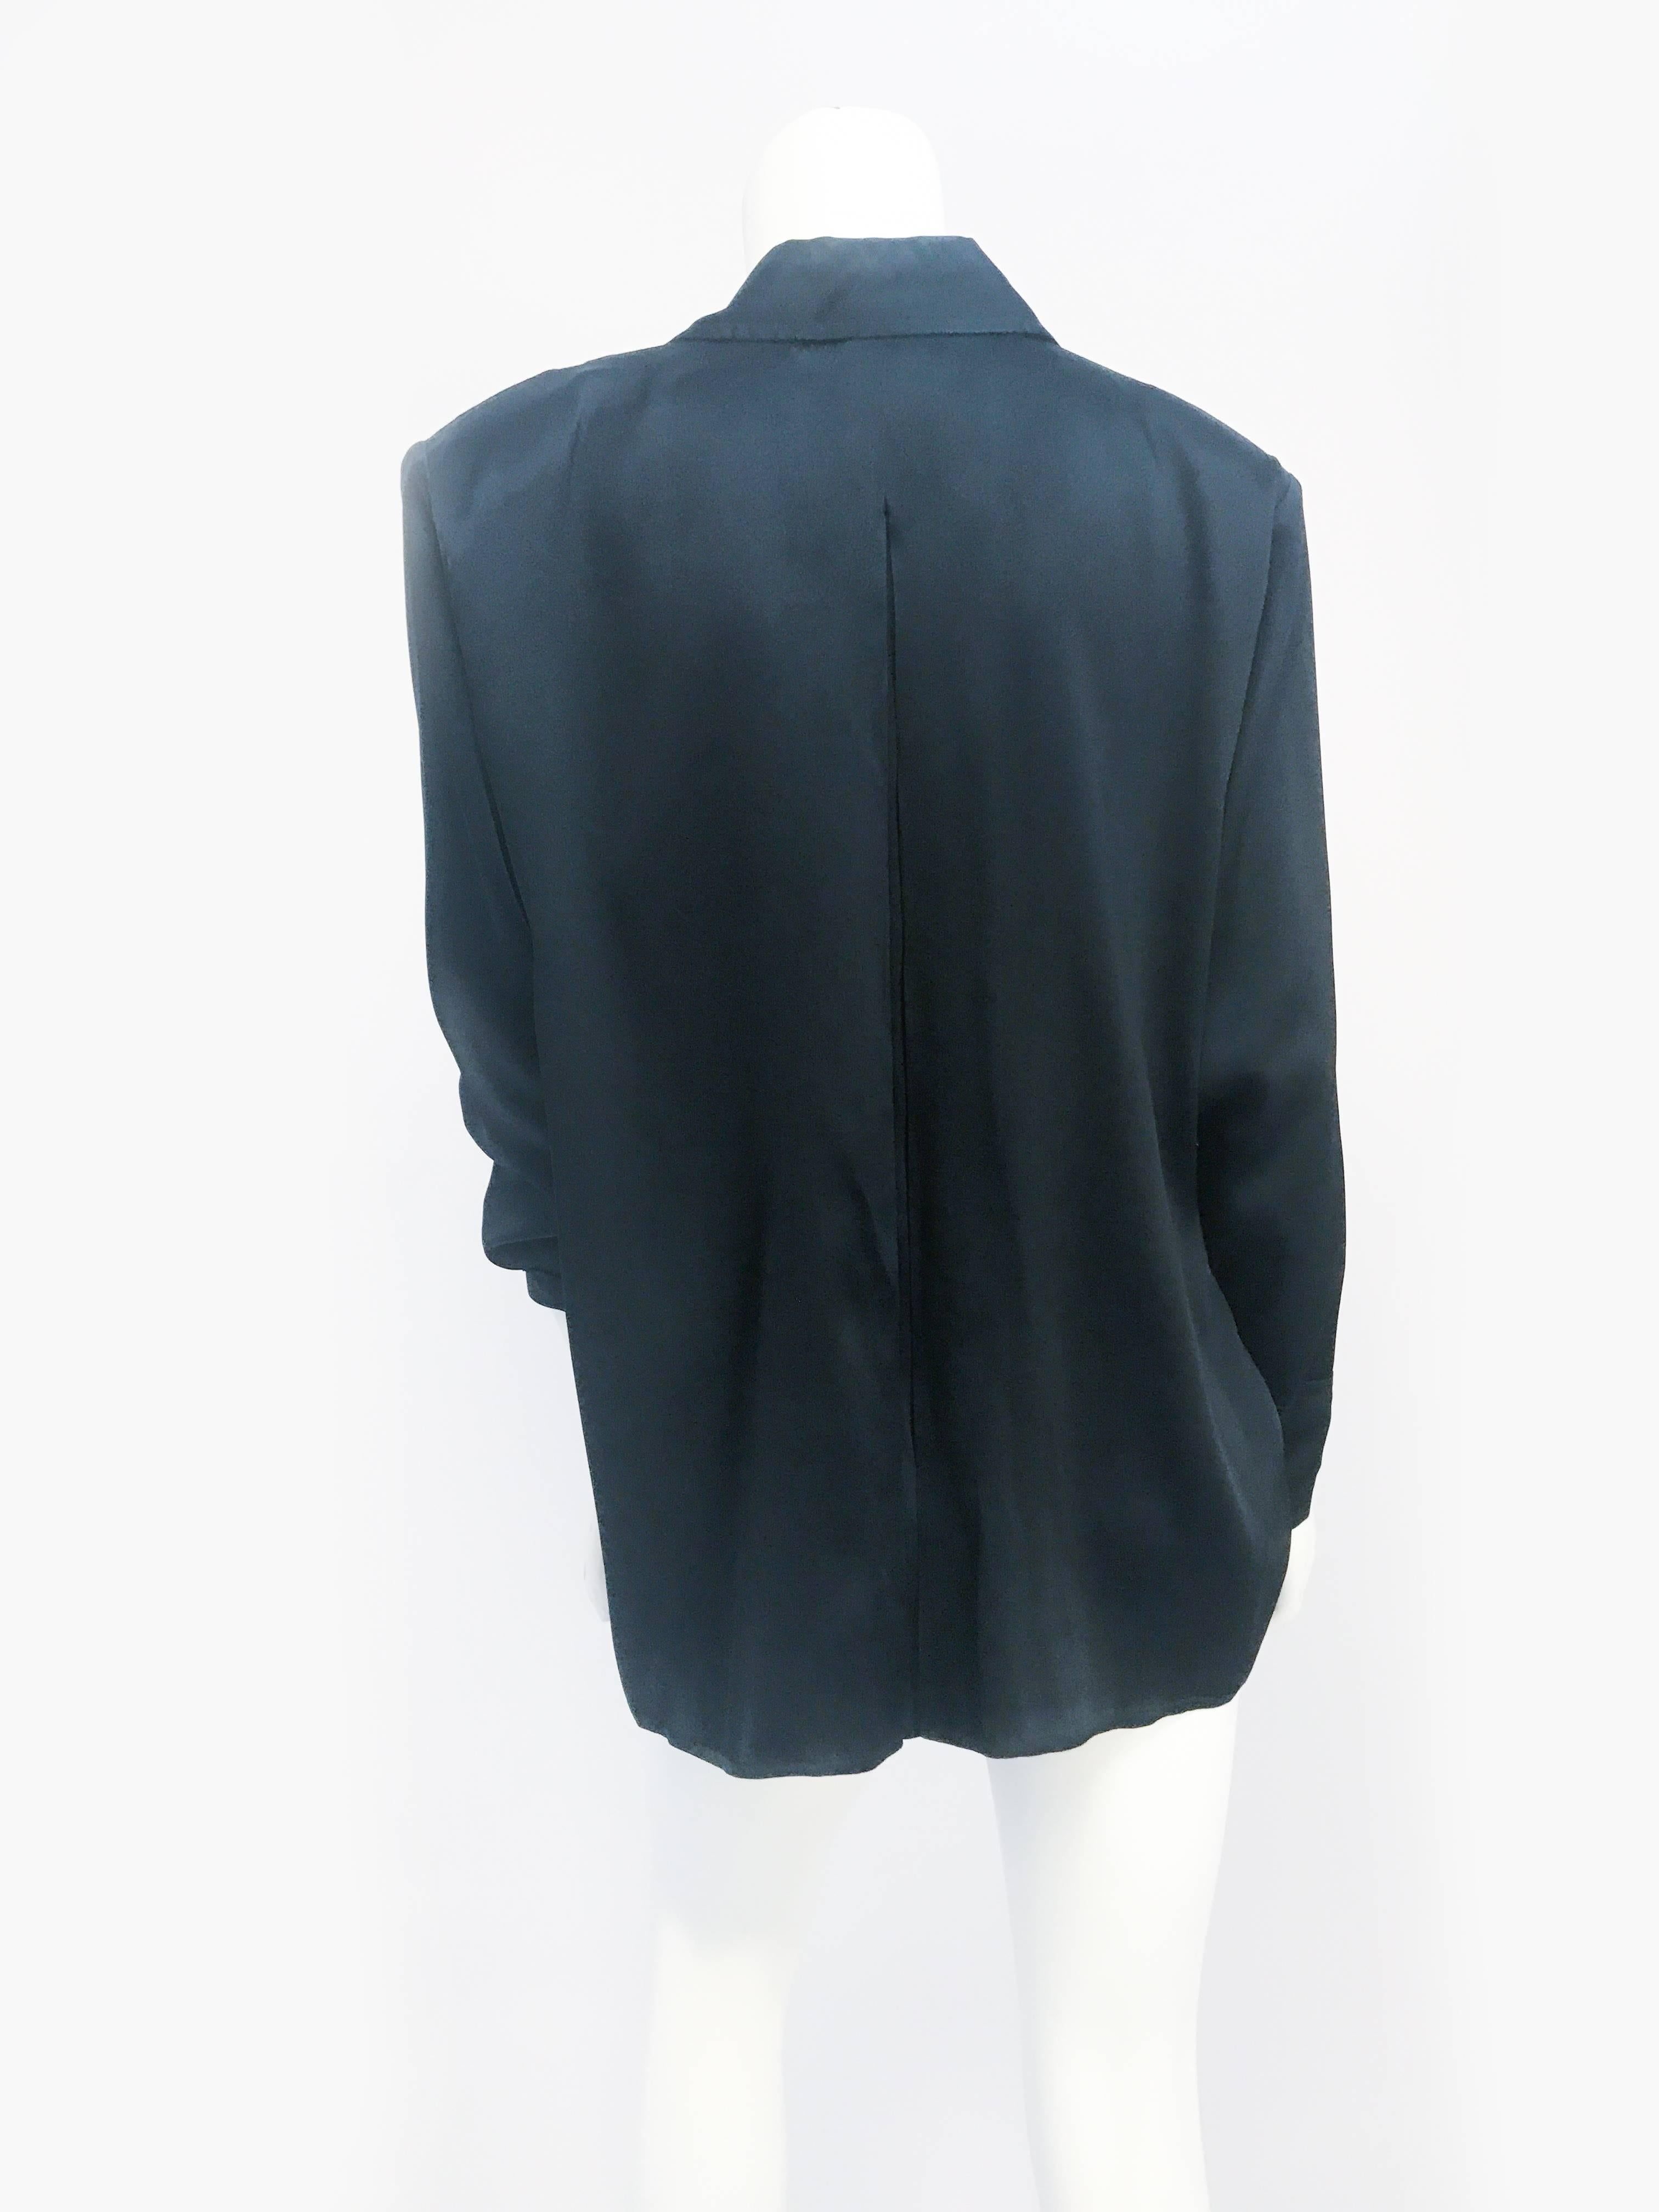 1980s Yves Saint Laurent Black Silk Blouse. Black silk blouse with padded shoulder and oversized pleats.